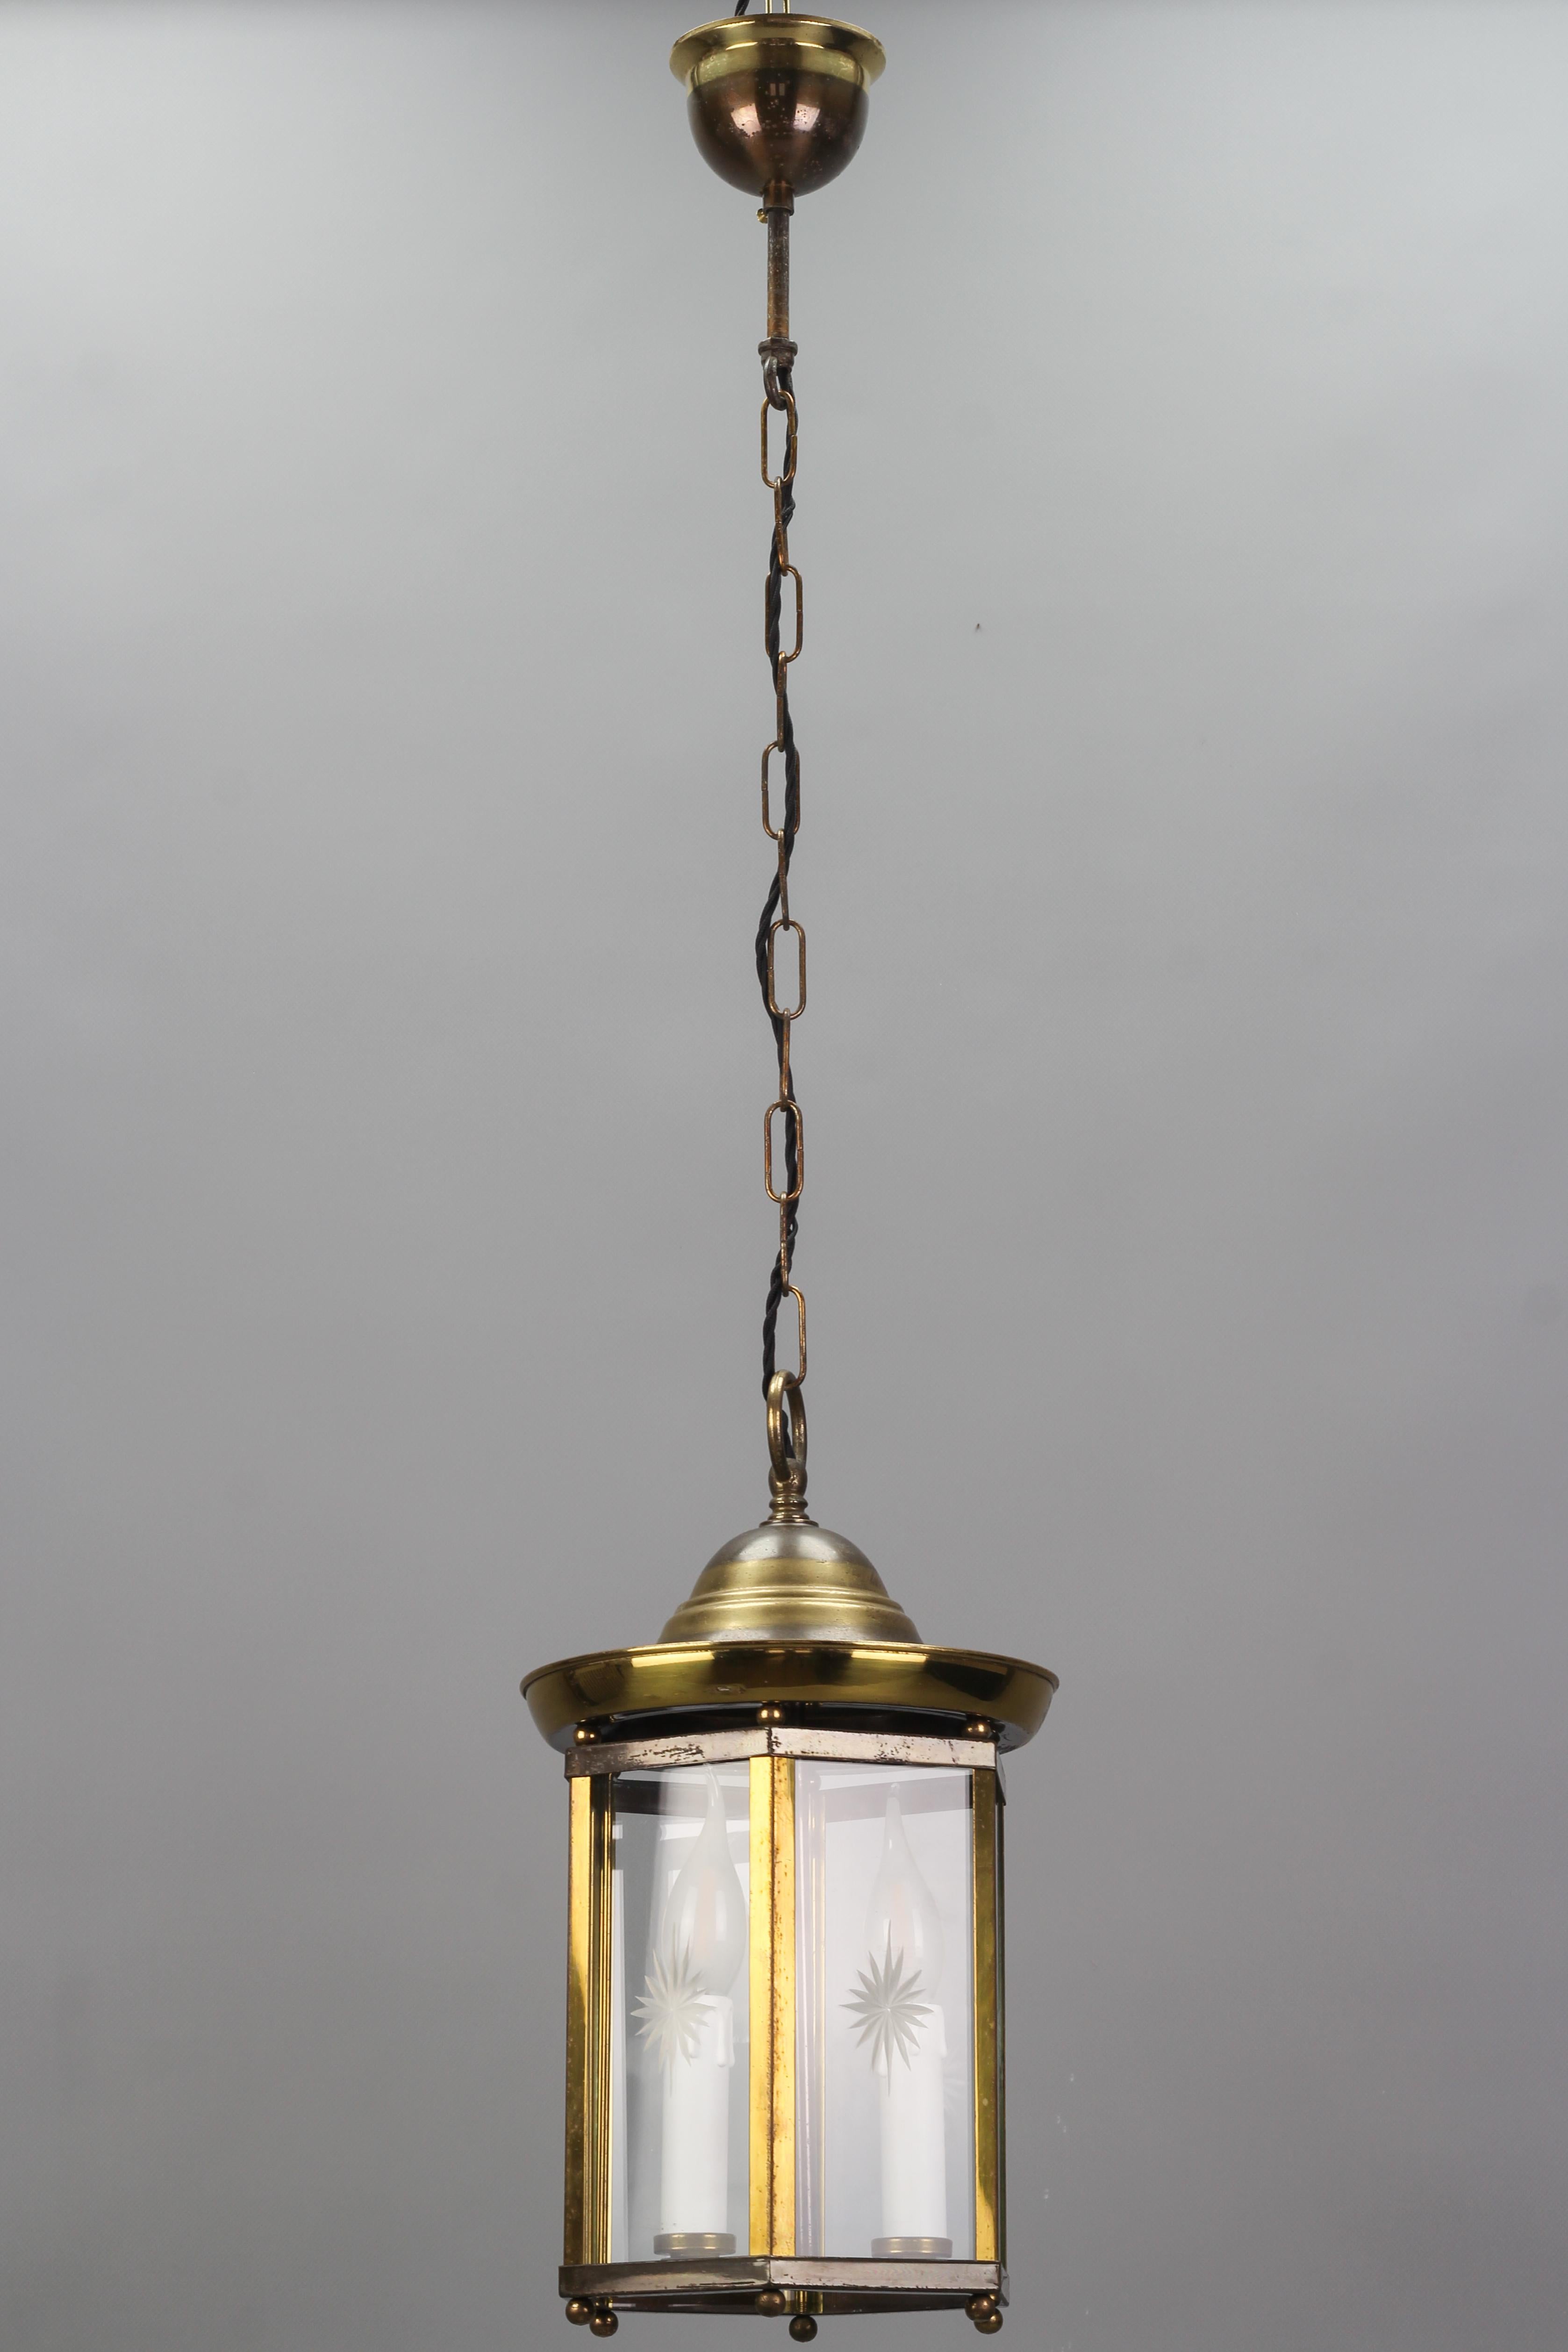 French vintage brass and cut clear glass hexagonal hanging lantern from circa the 1950s.
This adorable pendant lantern features a hexagonal brass and metal frame with a round-shaped top and canopy. Six clear glass panels each with the cut decor of